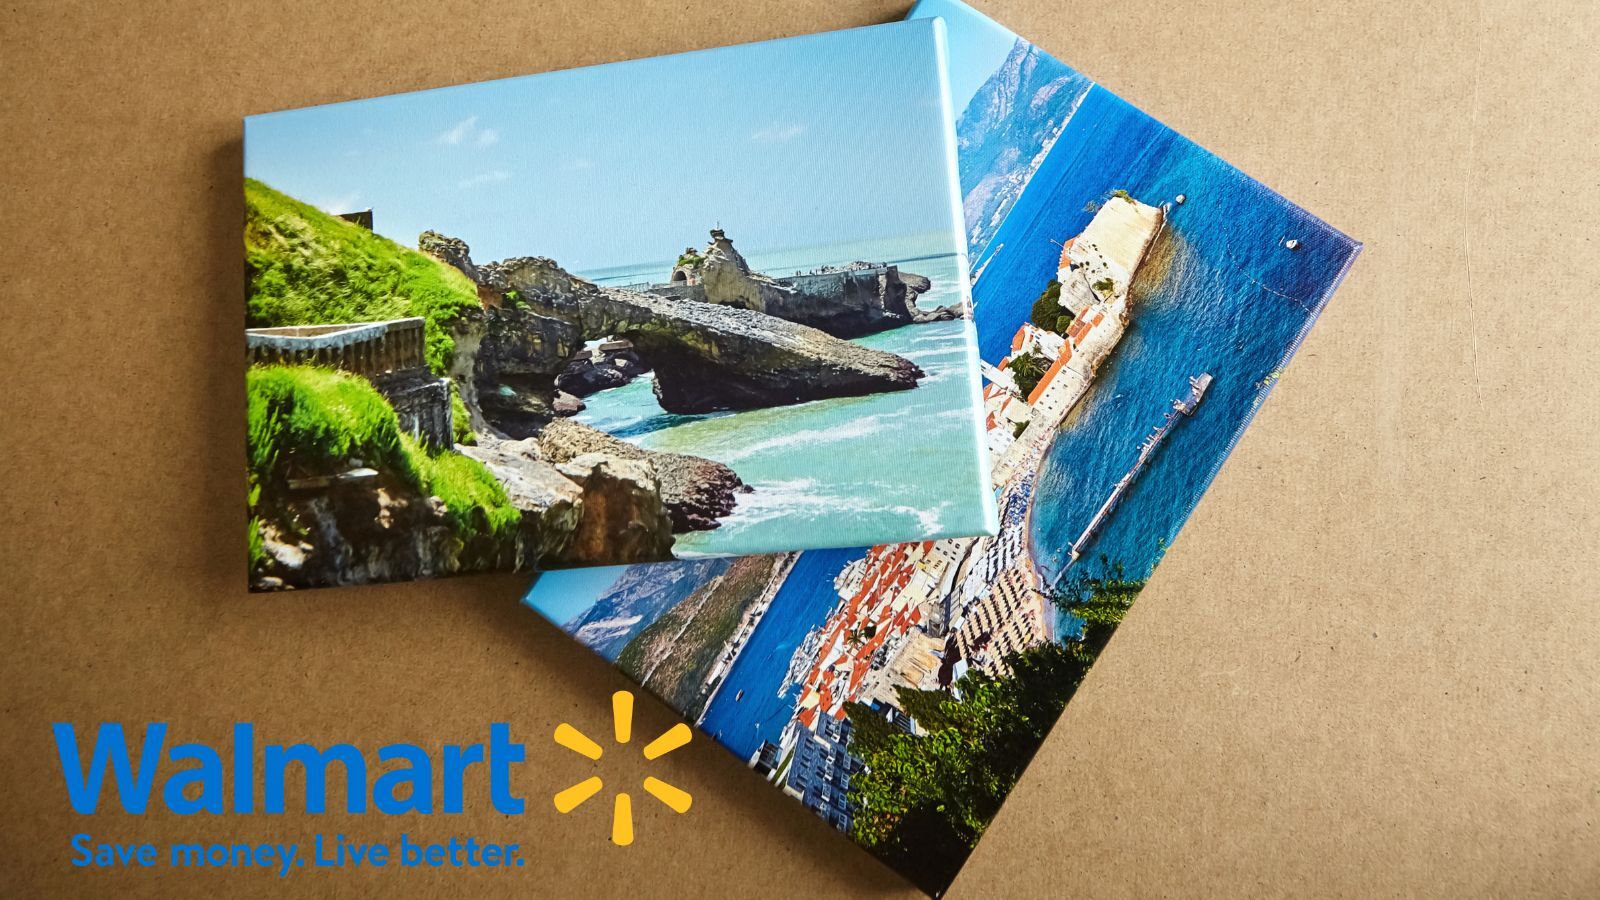 Does Walmart Print Photos? (How to Print, Types of Photos, and Price)